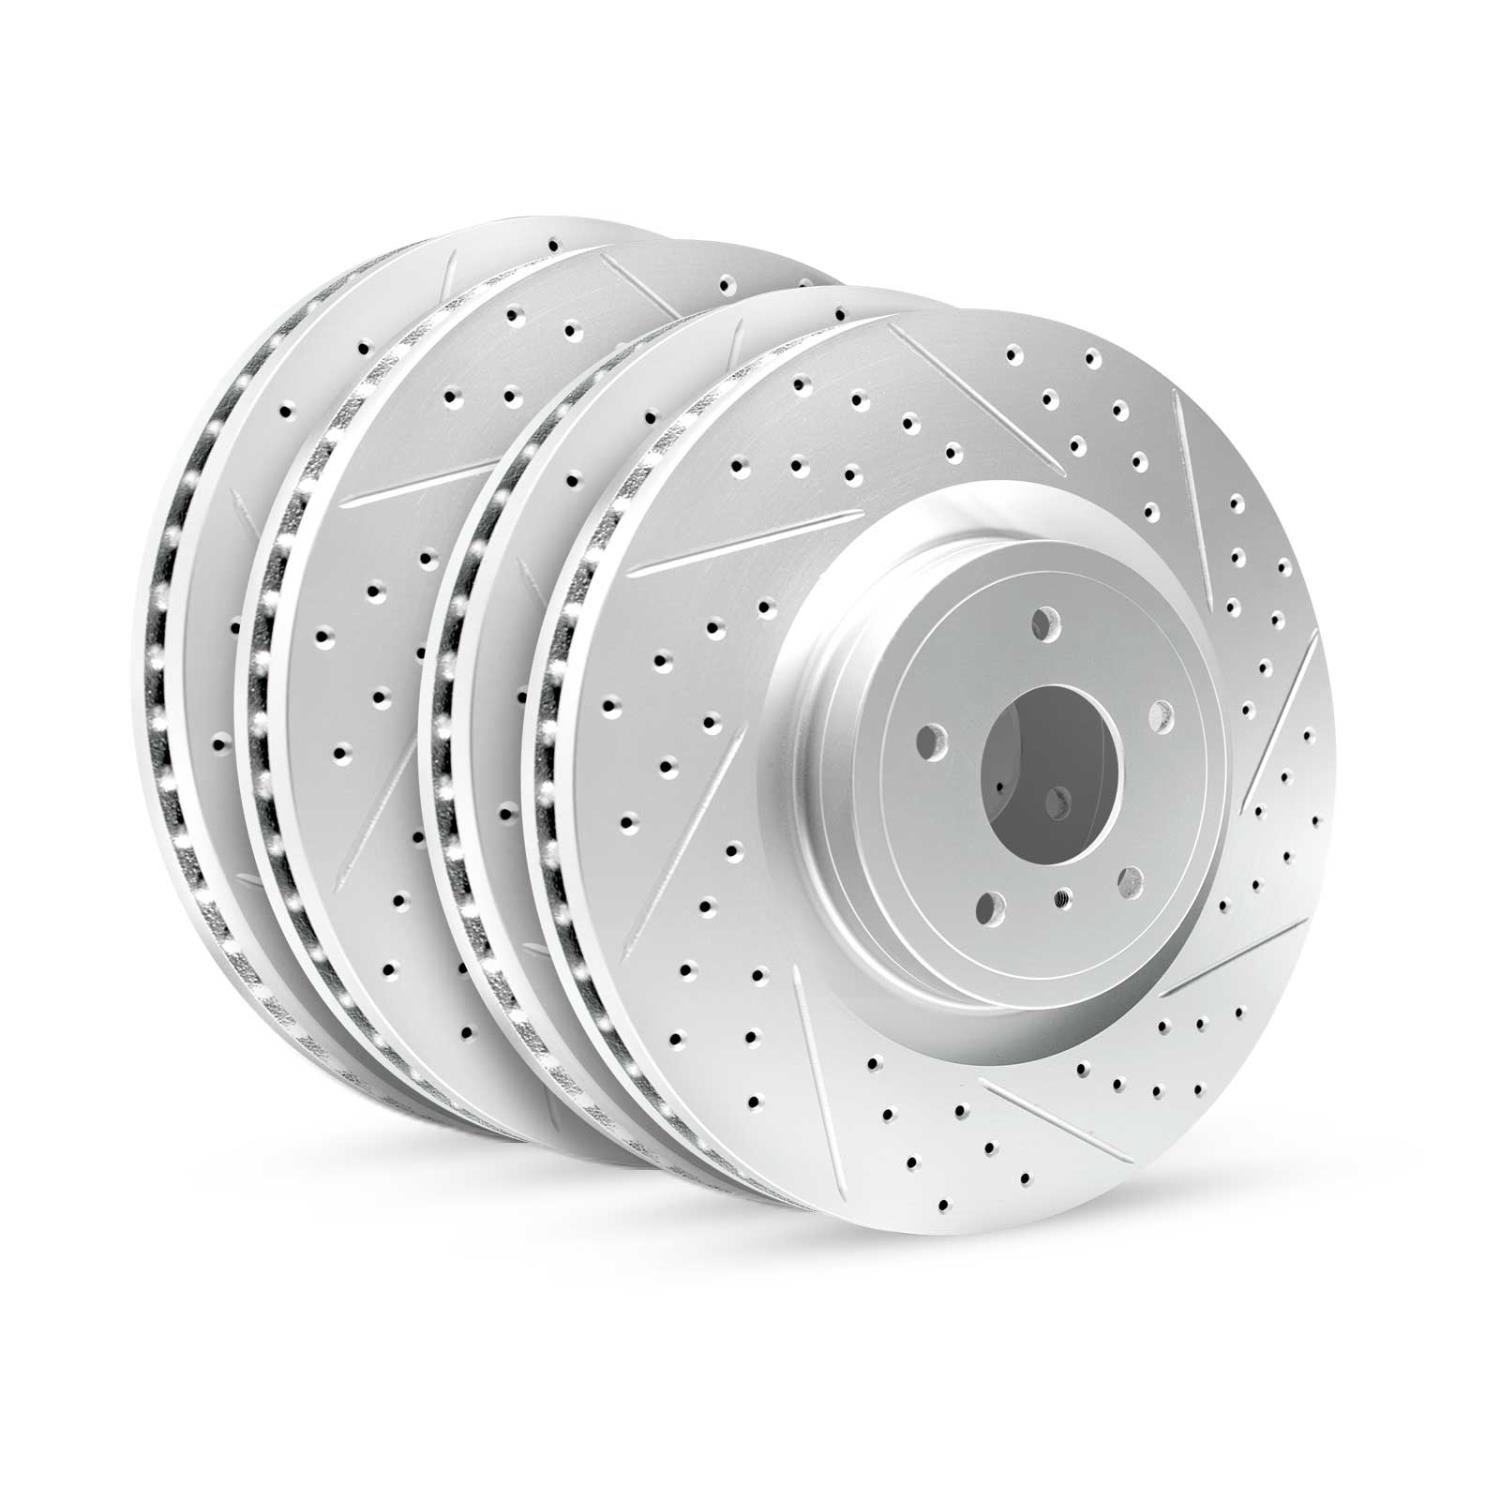 GEO-Carbon Drilled/Slotted Rotors, 2015-2019 Kia/Hyundai/Genesis, Position: Front/Rear